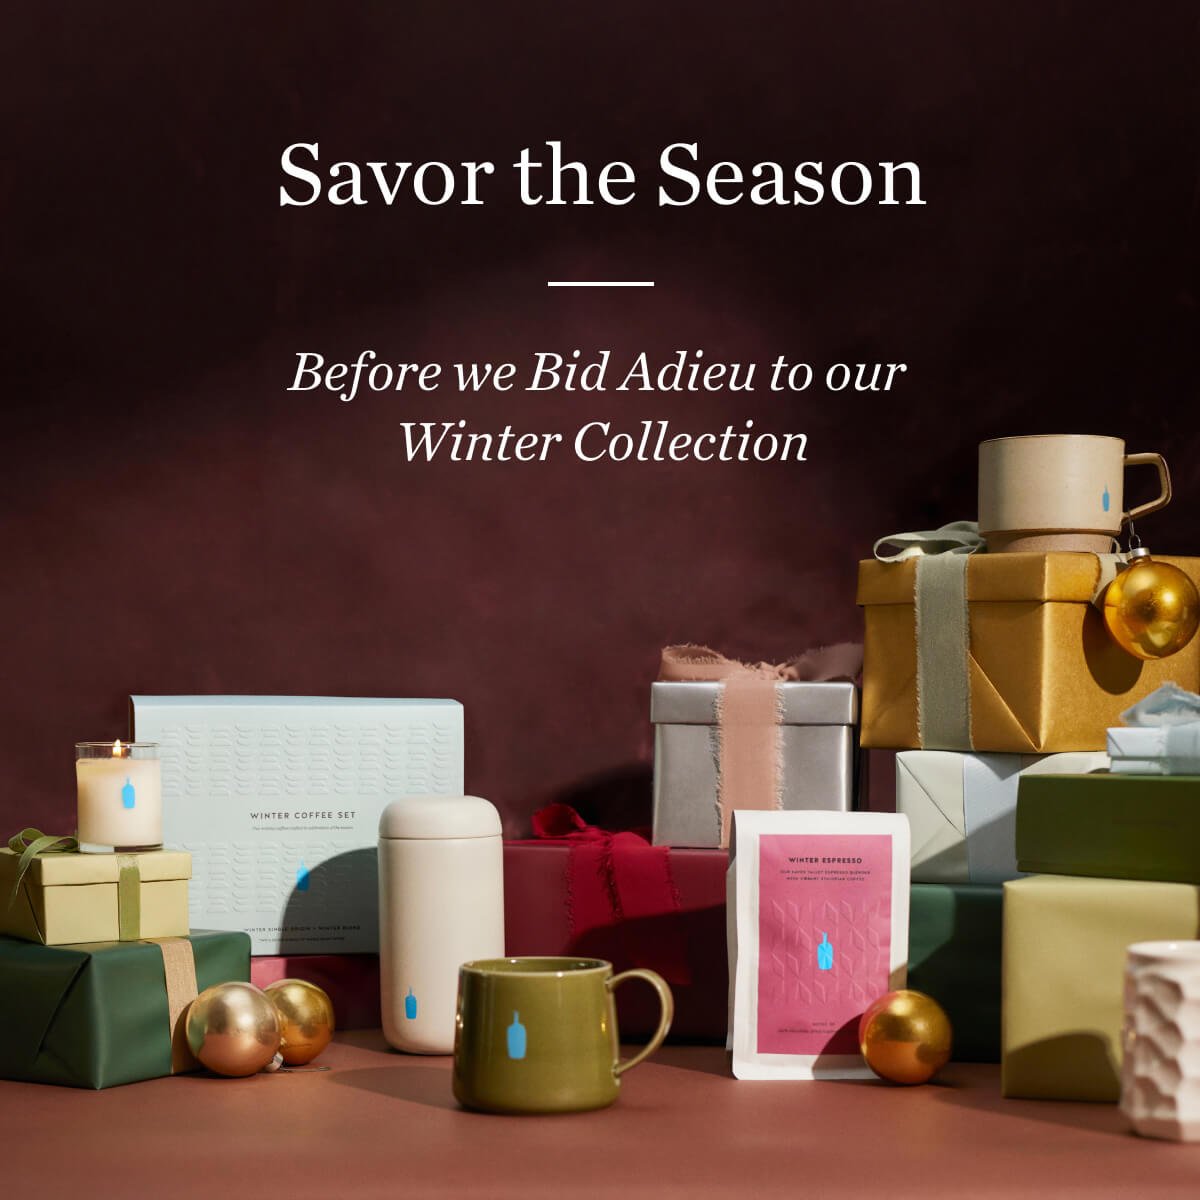 Savor the Season. Before we Bid Adieu to our Winter Collection.